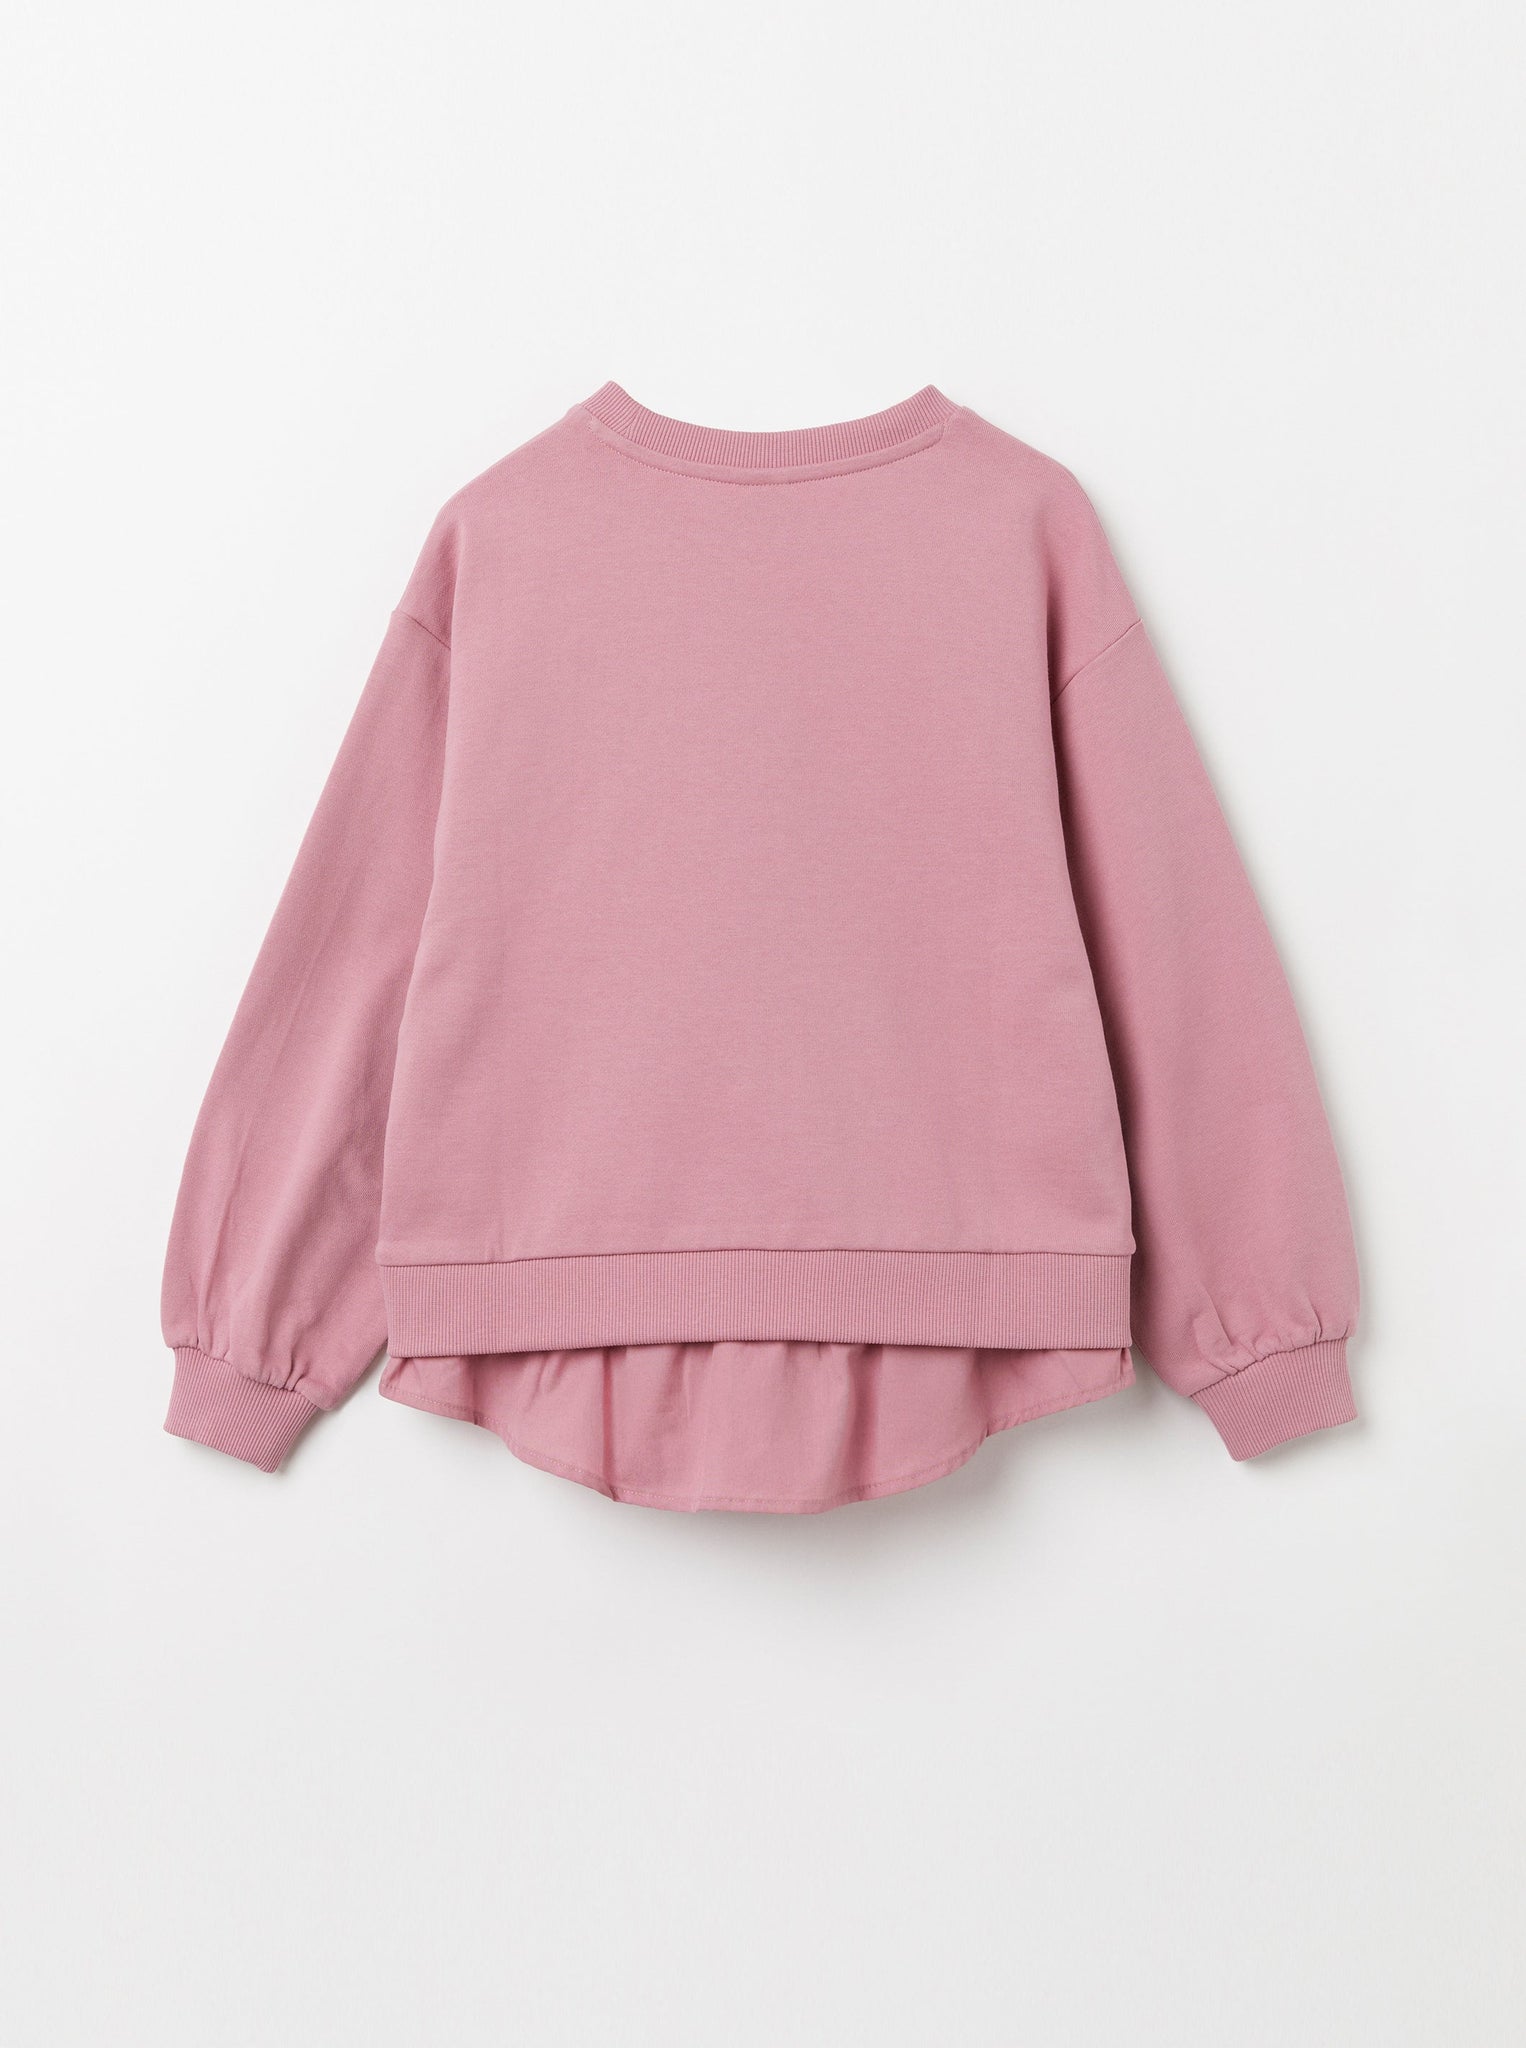 Organic Cotton Floral Kids Sweatshirt from the Polarn O. Pyret Kidswear collection. The best ethical kids clothes